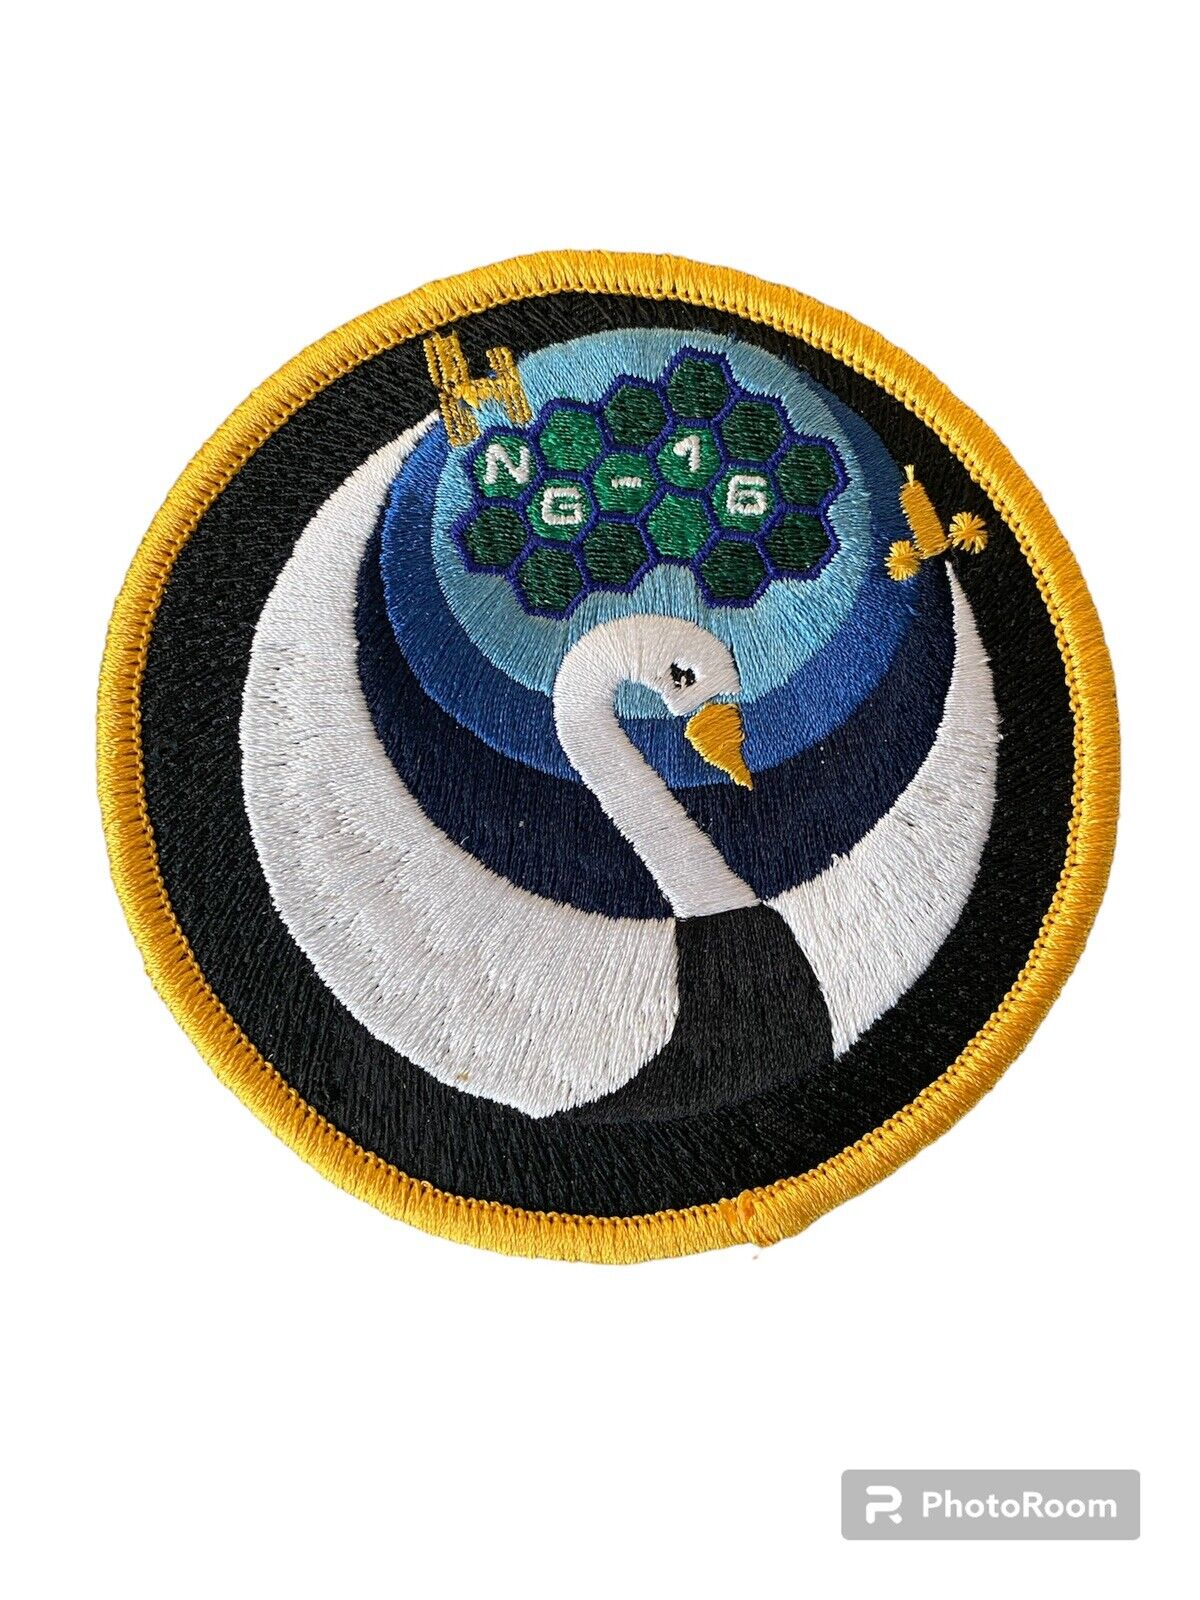 Authentic CYGNUS NG-16  Northrop Grumman CRS ISS Mission A-B Emblem SPACE PATCH